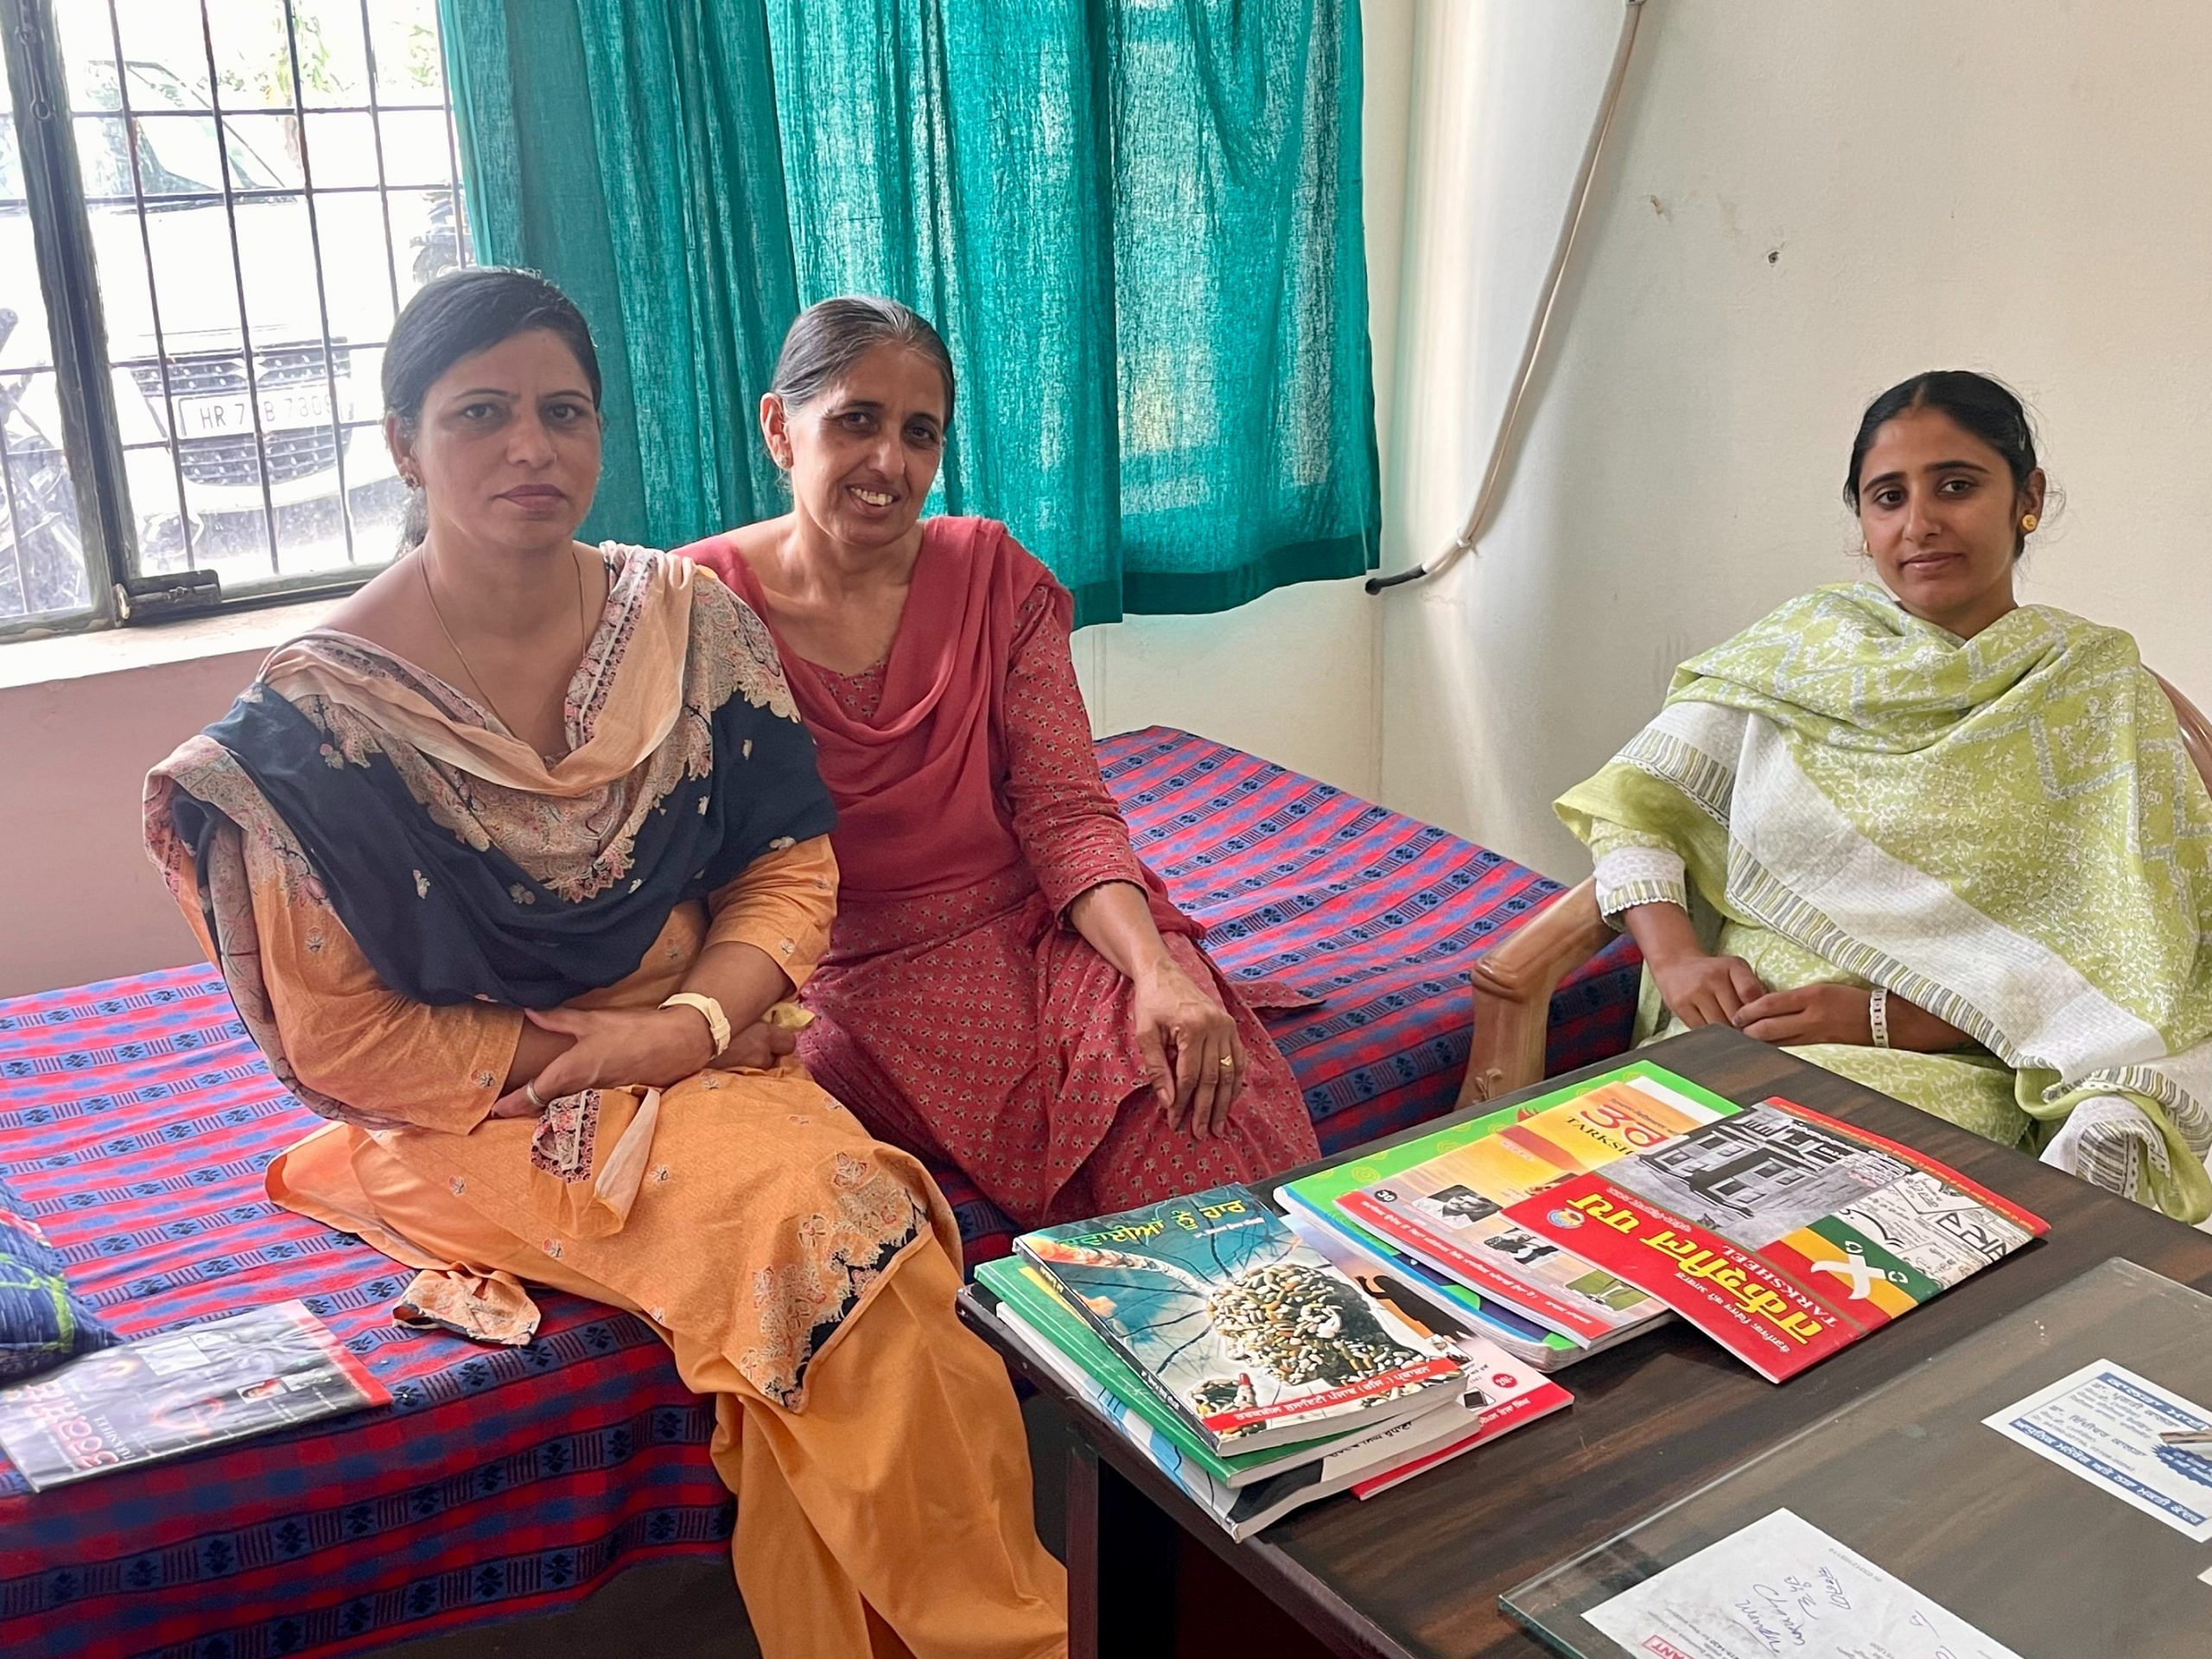 Sarabjeet Kaur, 42, is flanked by Jaswinder ,47, and Navdeep Kaur, 29. All three women have been visitors to the makeshift weekend 'clinic' run by the rationalist group in Bargari in Punjab's Faridkot | Sabah Gurmat, ThePrint